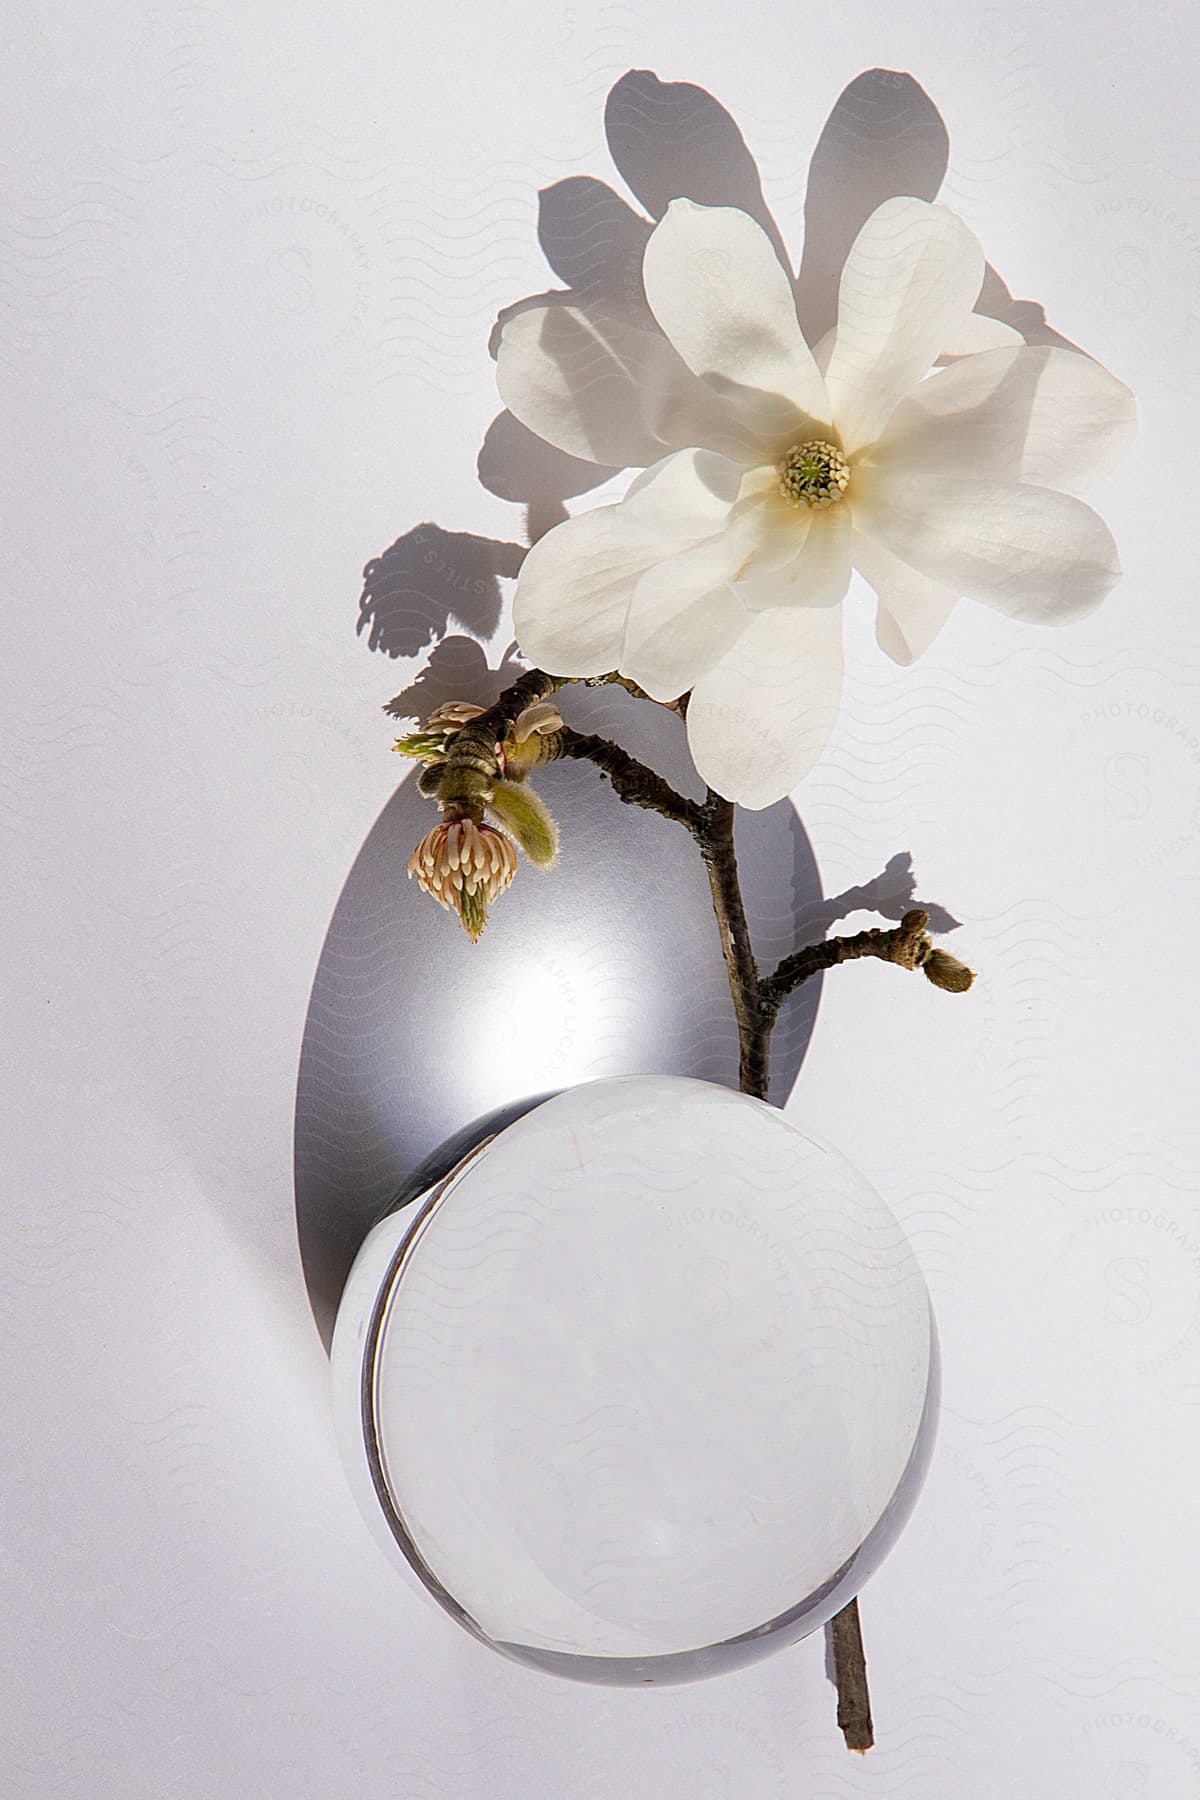 A delicate white flower and its branch are artfully positioned against a round, reflective surface.